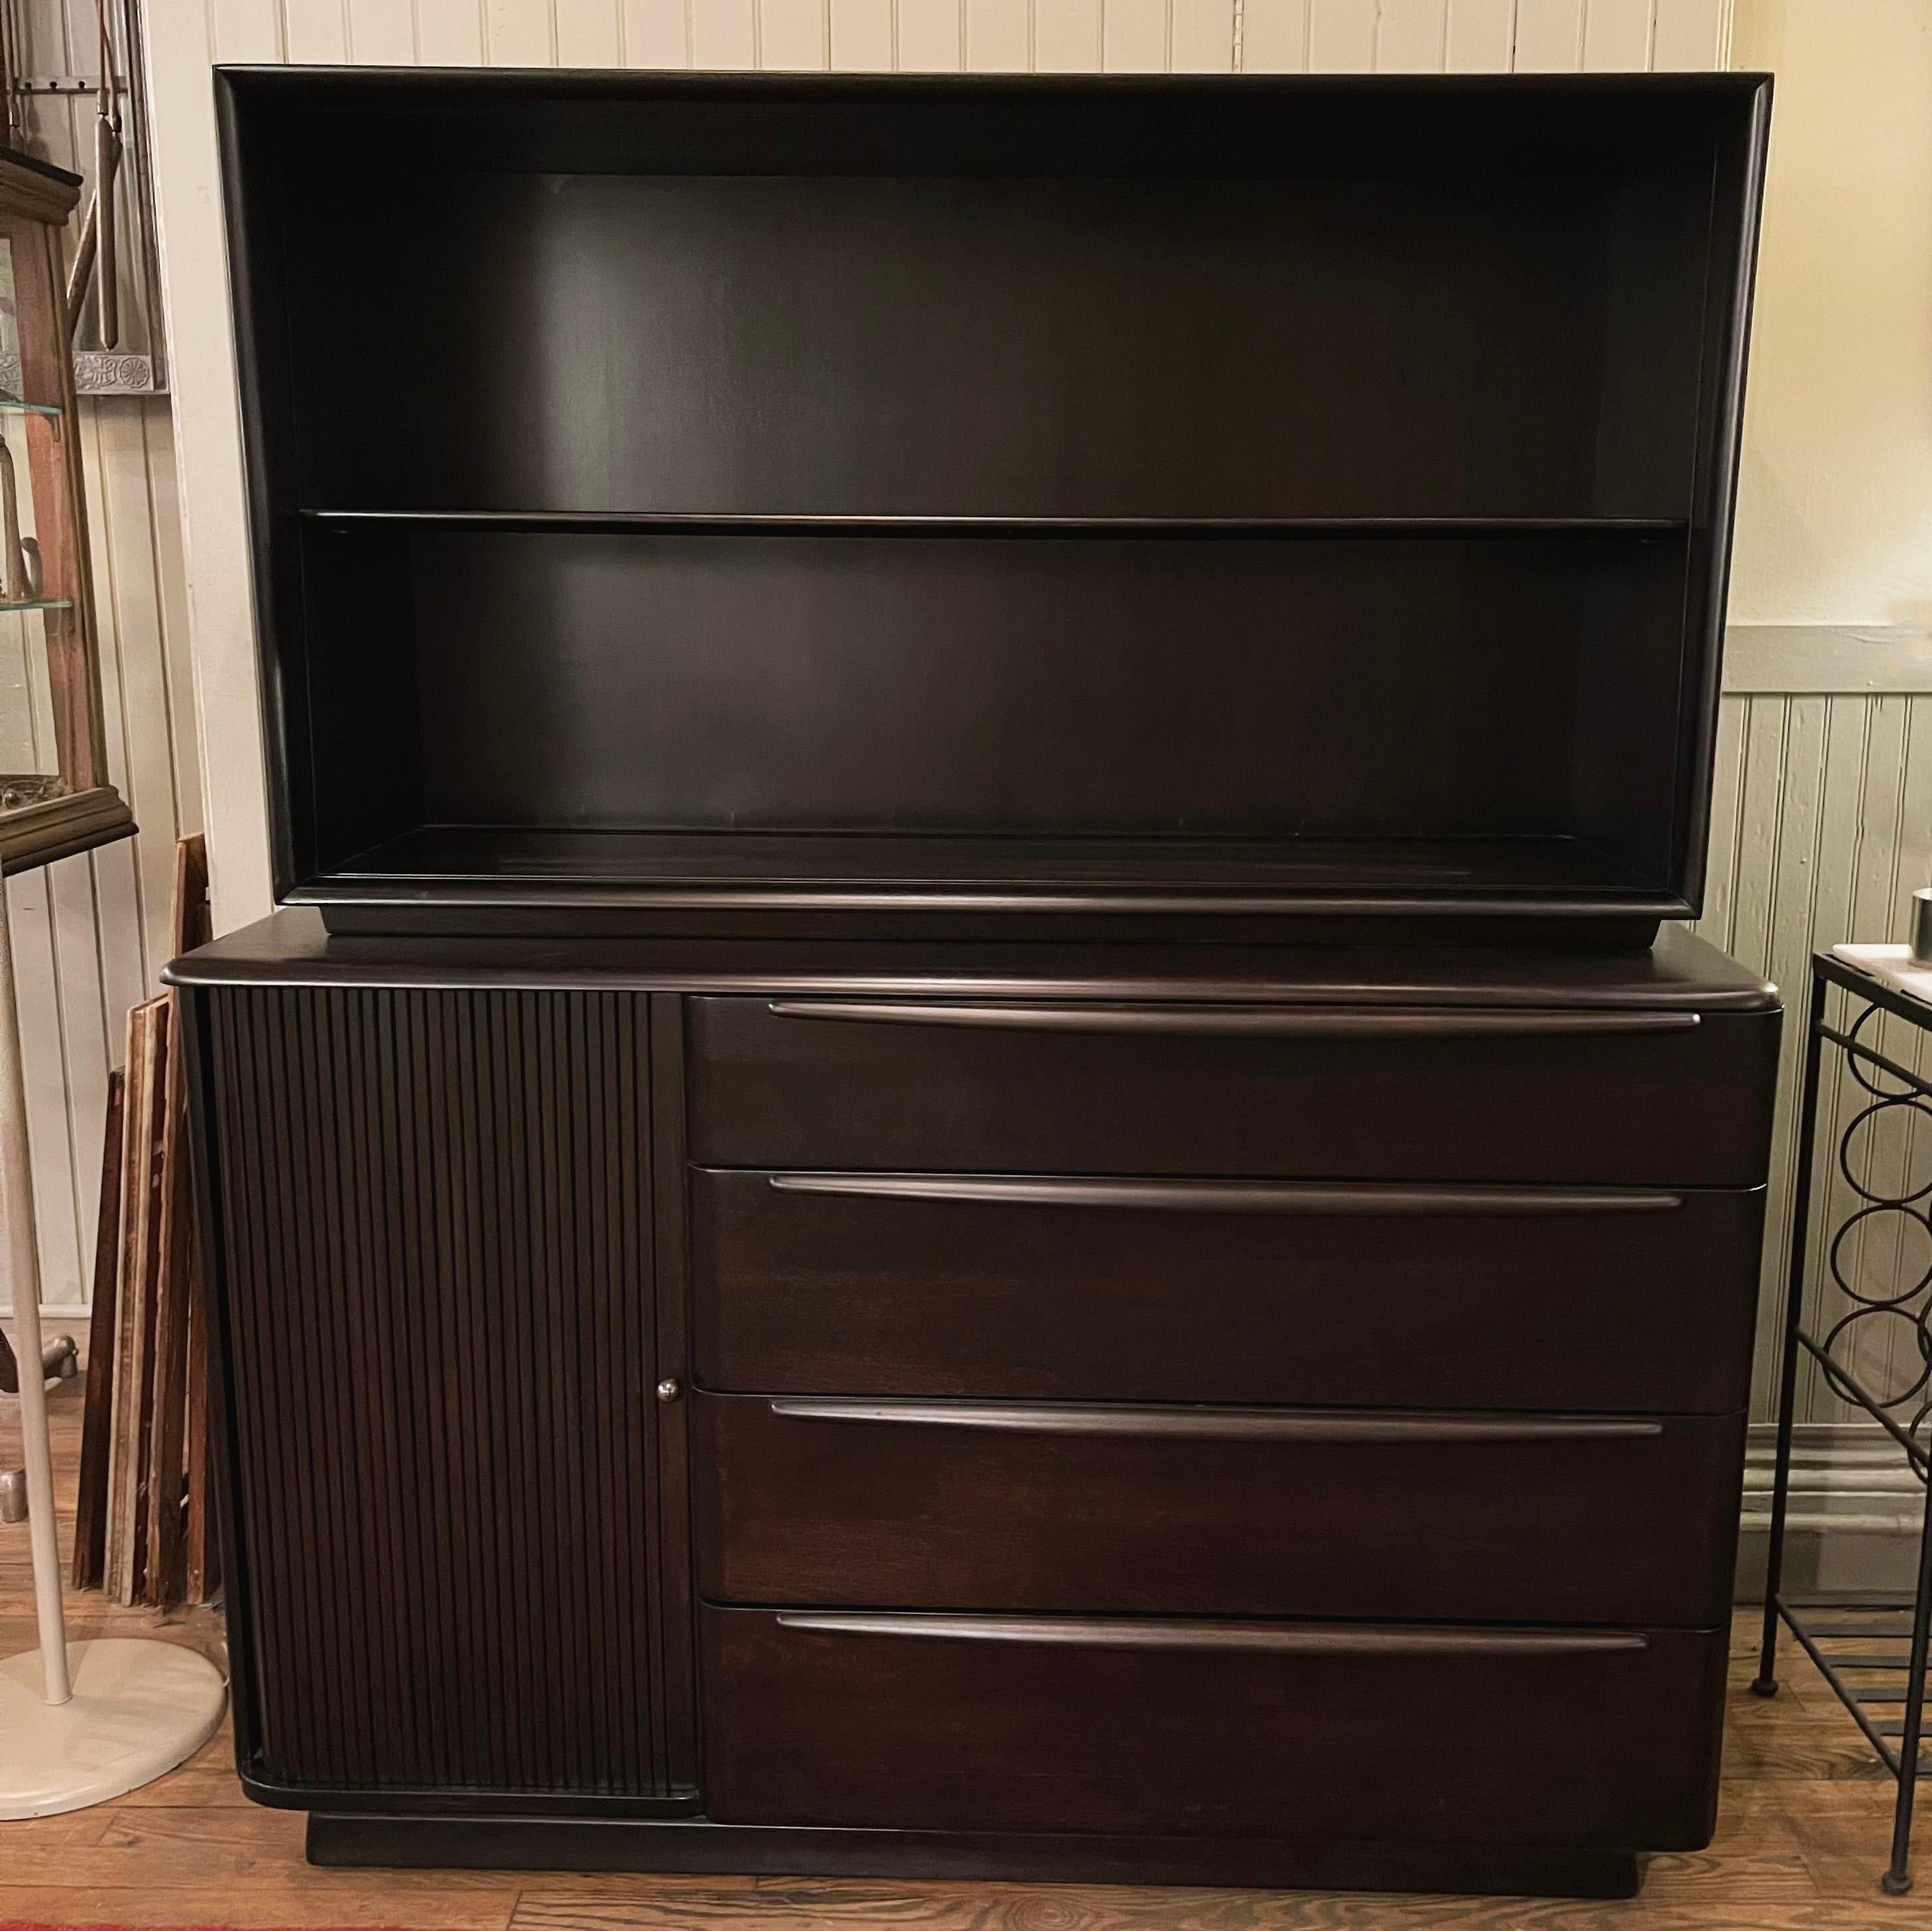 Iconic, art deco inspired, Mid-Century Modern, ebonized maple, two piece, credenza hutch by Heywood Wakefield Co. features a bottom credenza with left side tambour front compartment and three drawers and top hutch with open shelving. The top portion